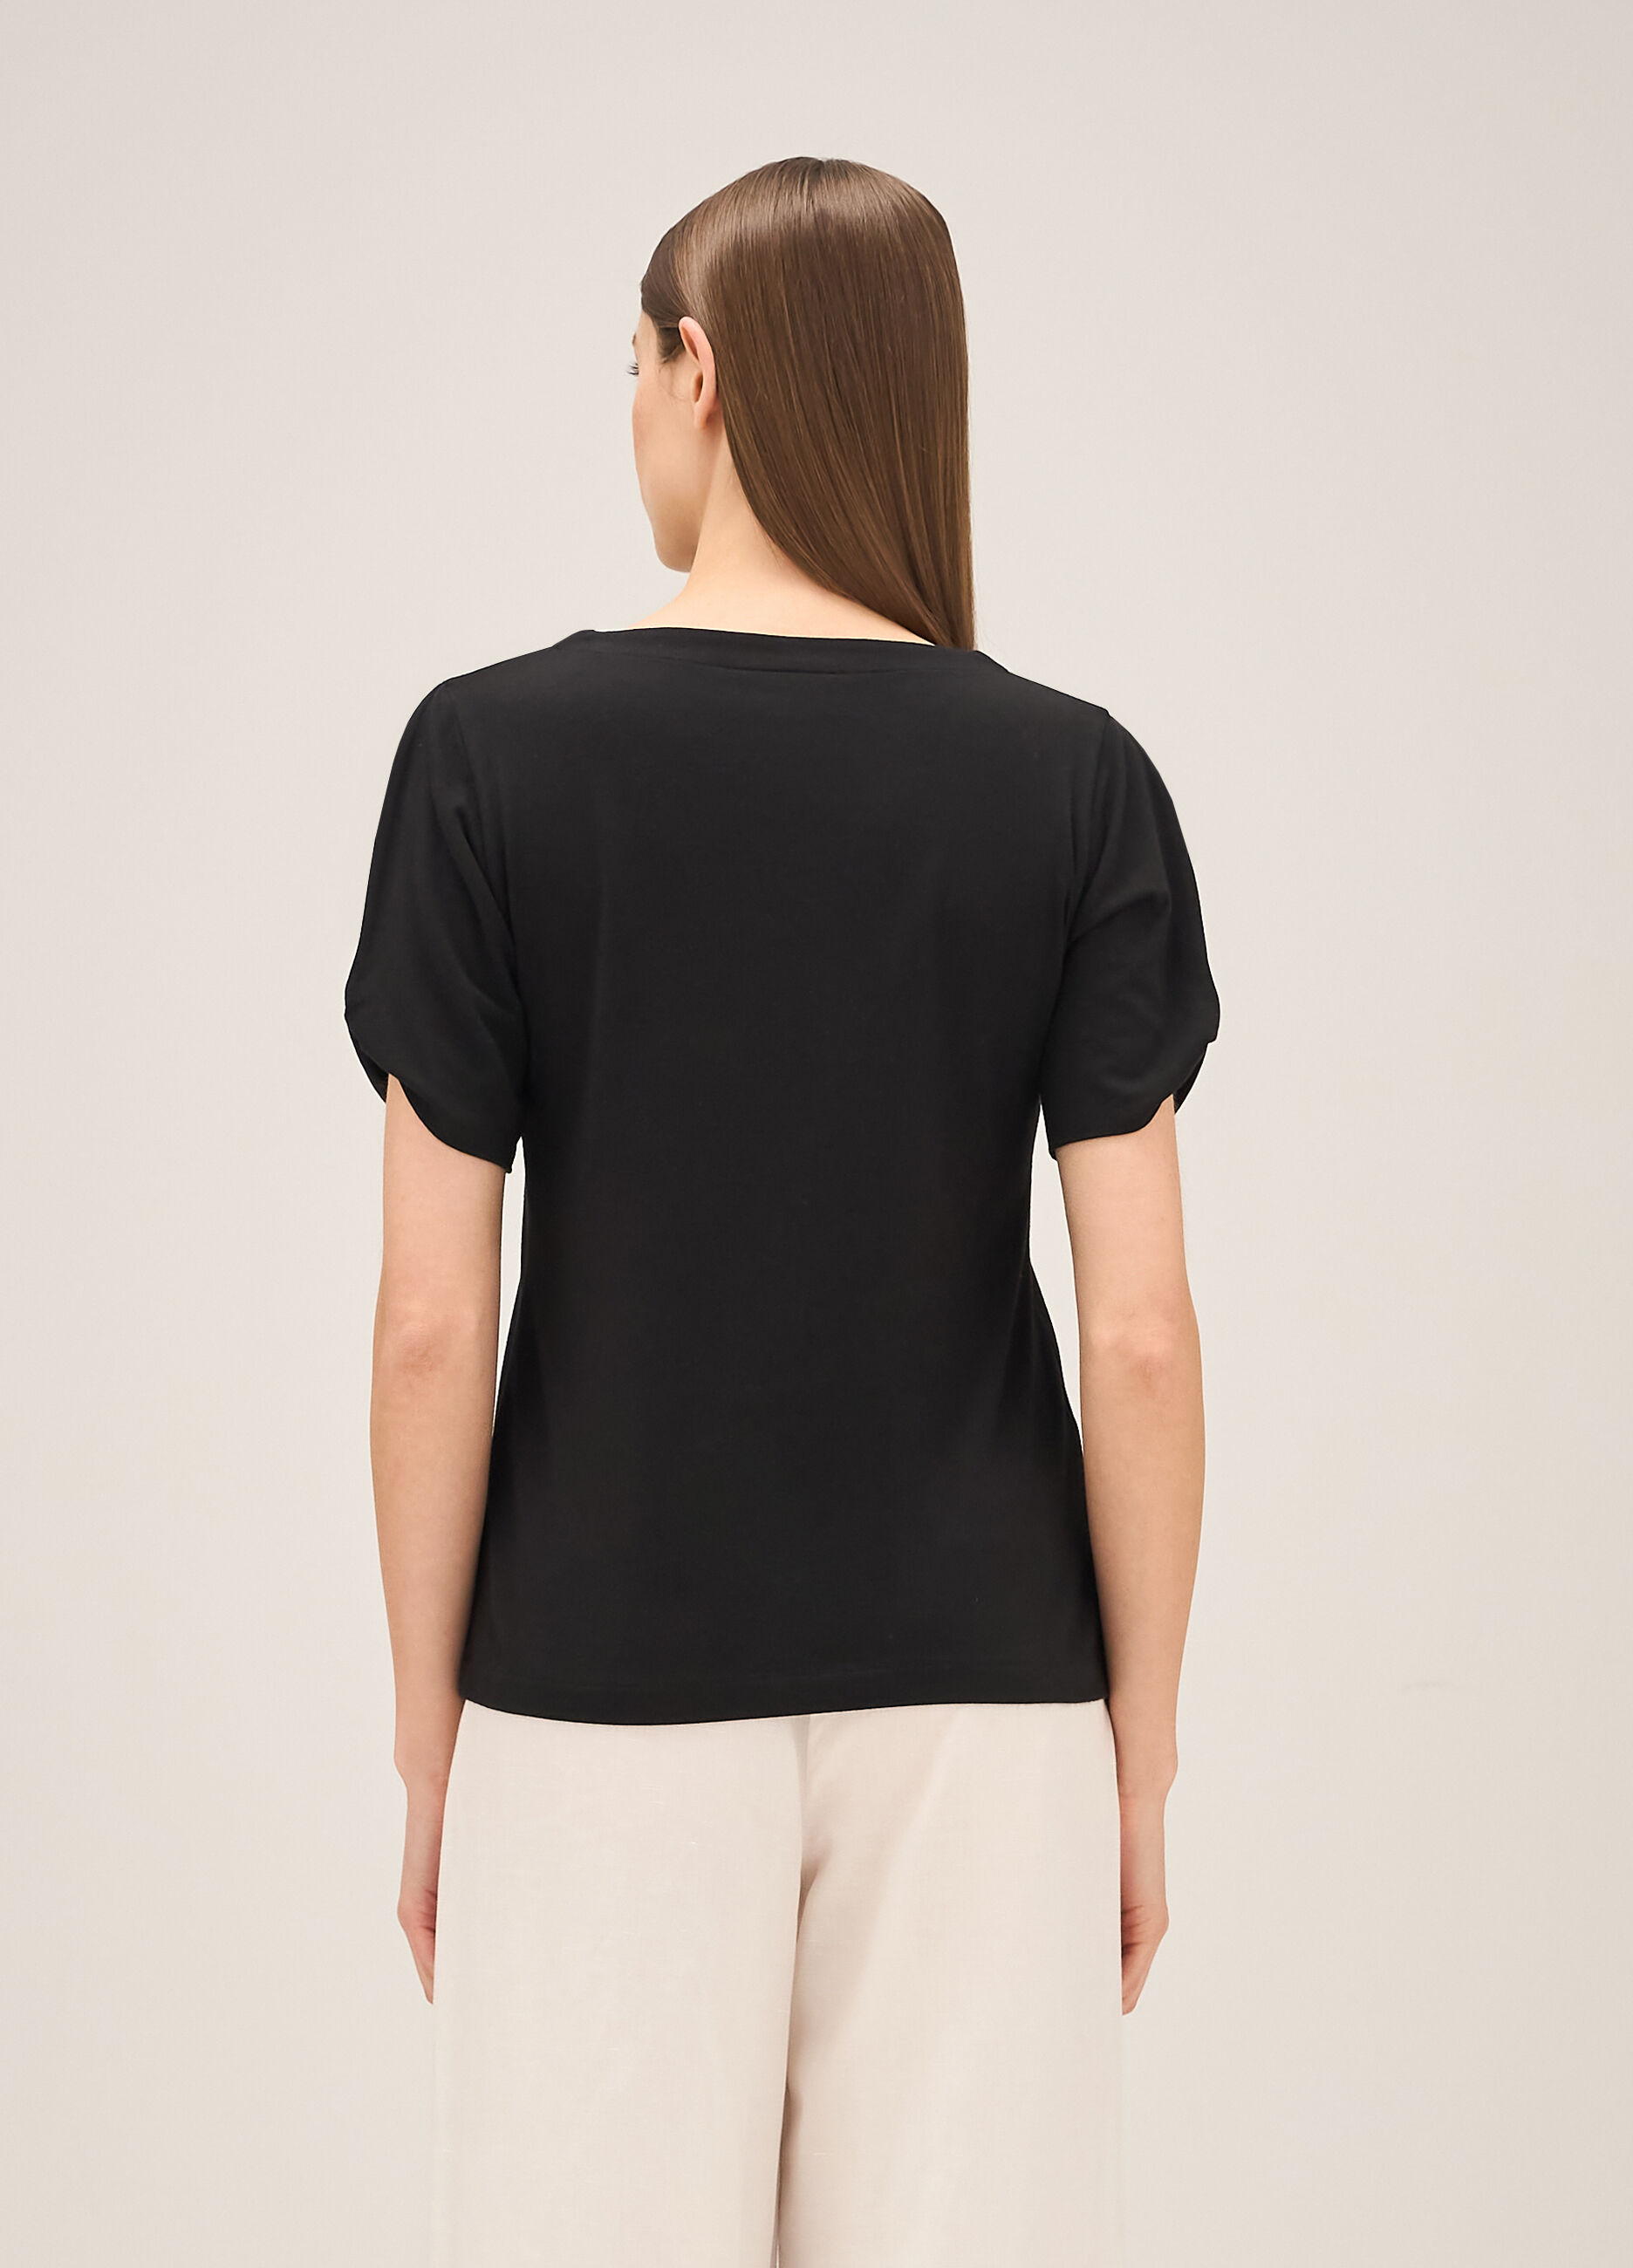 Cotton and modal T-shirt_2